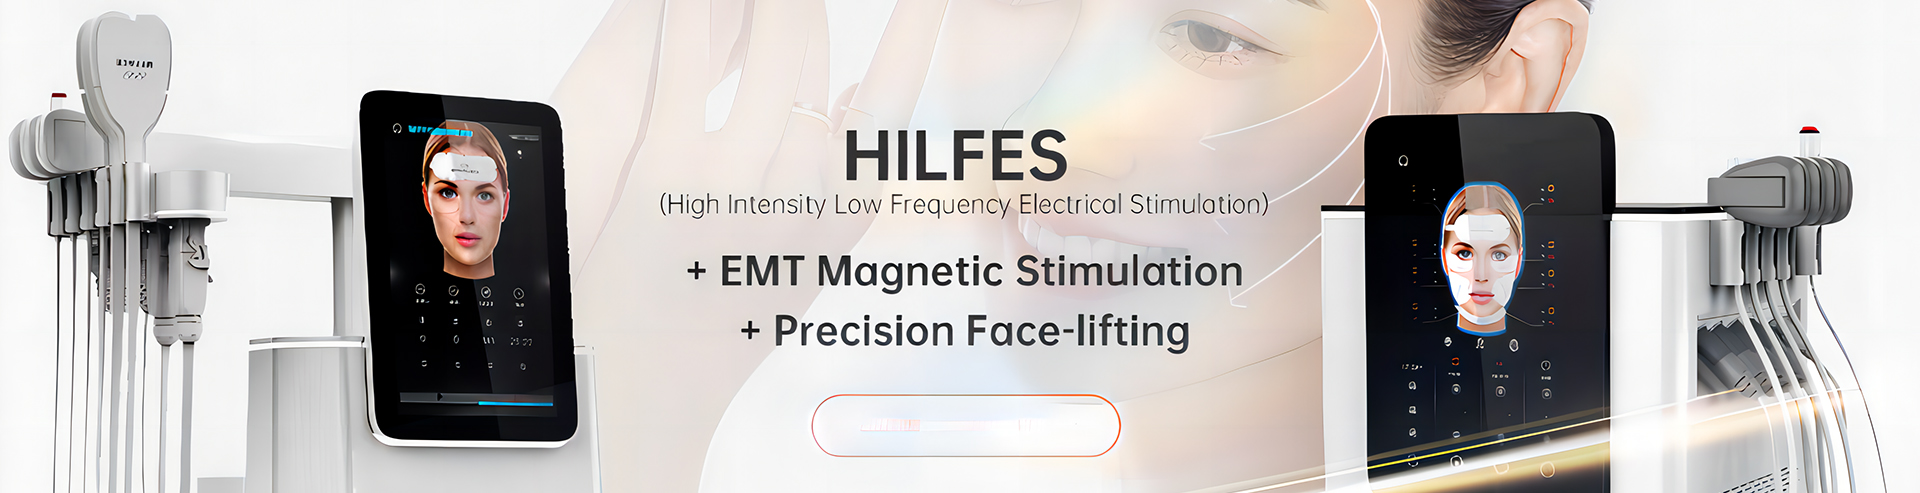 HILFES (High Intensity Low Frequency Electrical Stimulation) + EMT Magnetic Stimulation